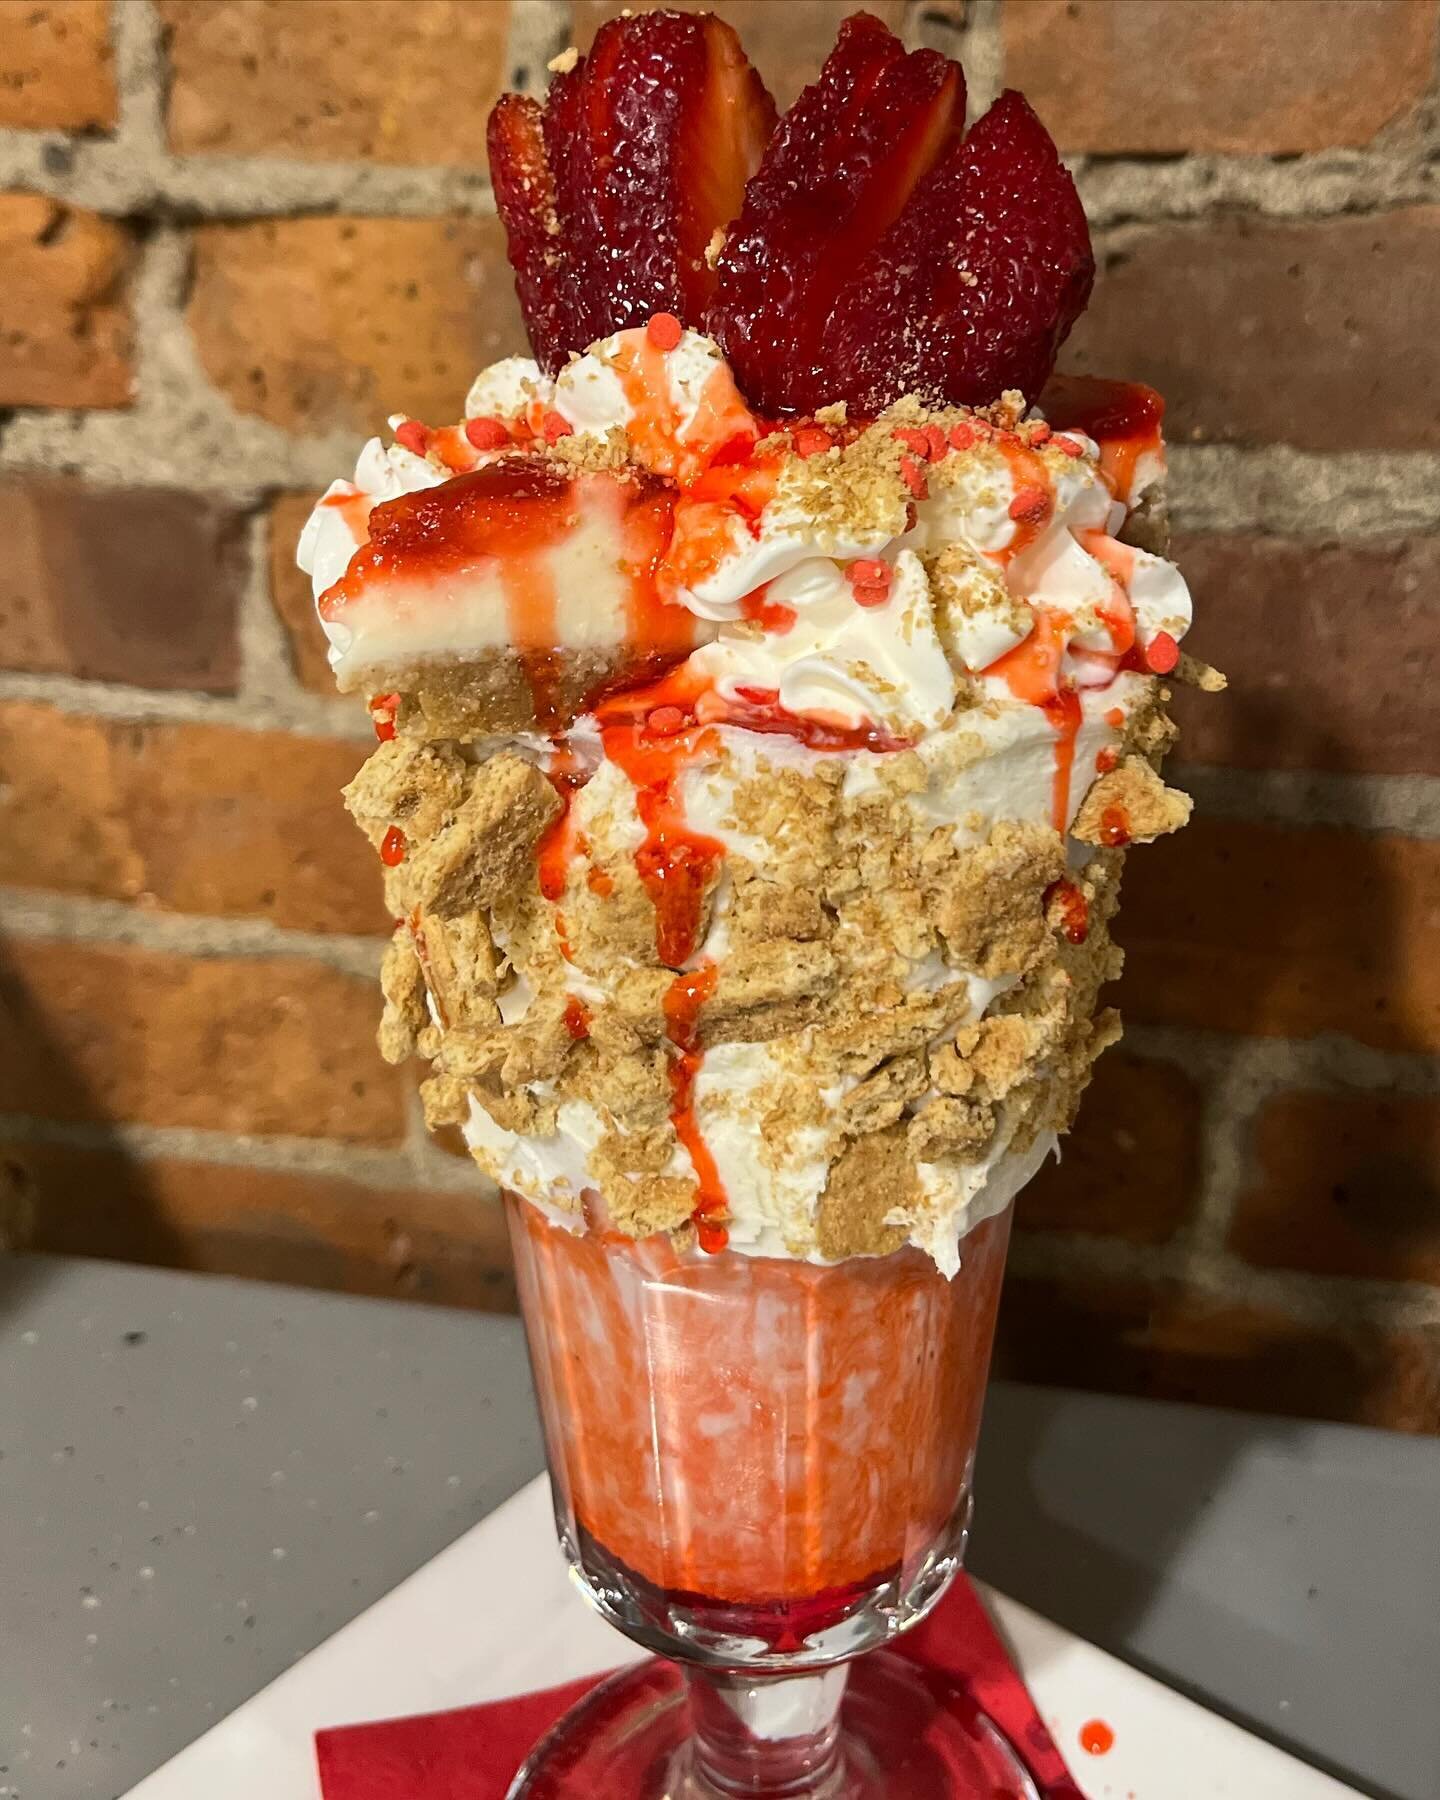 Seems like a Strawberry Shortcake kind of day and we can&rsquo;t think of a better way to enjoy a serving than this #amazingshake @santafeburgerbar #happyweekend #dessertfirst #rosendaleny #burgers #burgersandfries #upstateeats